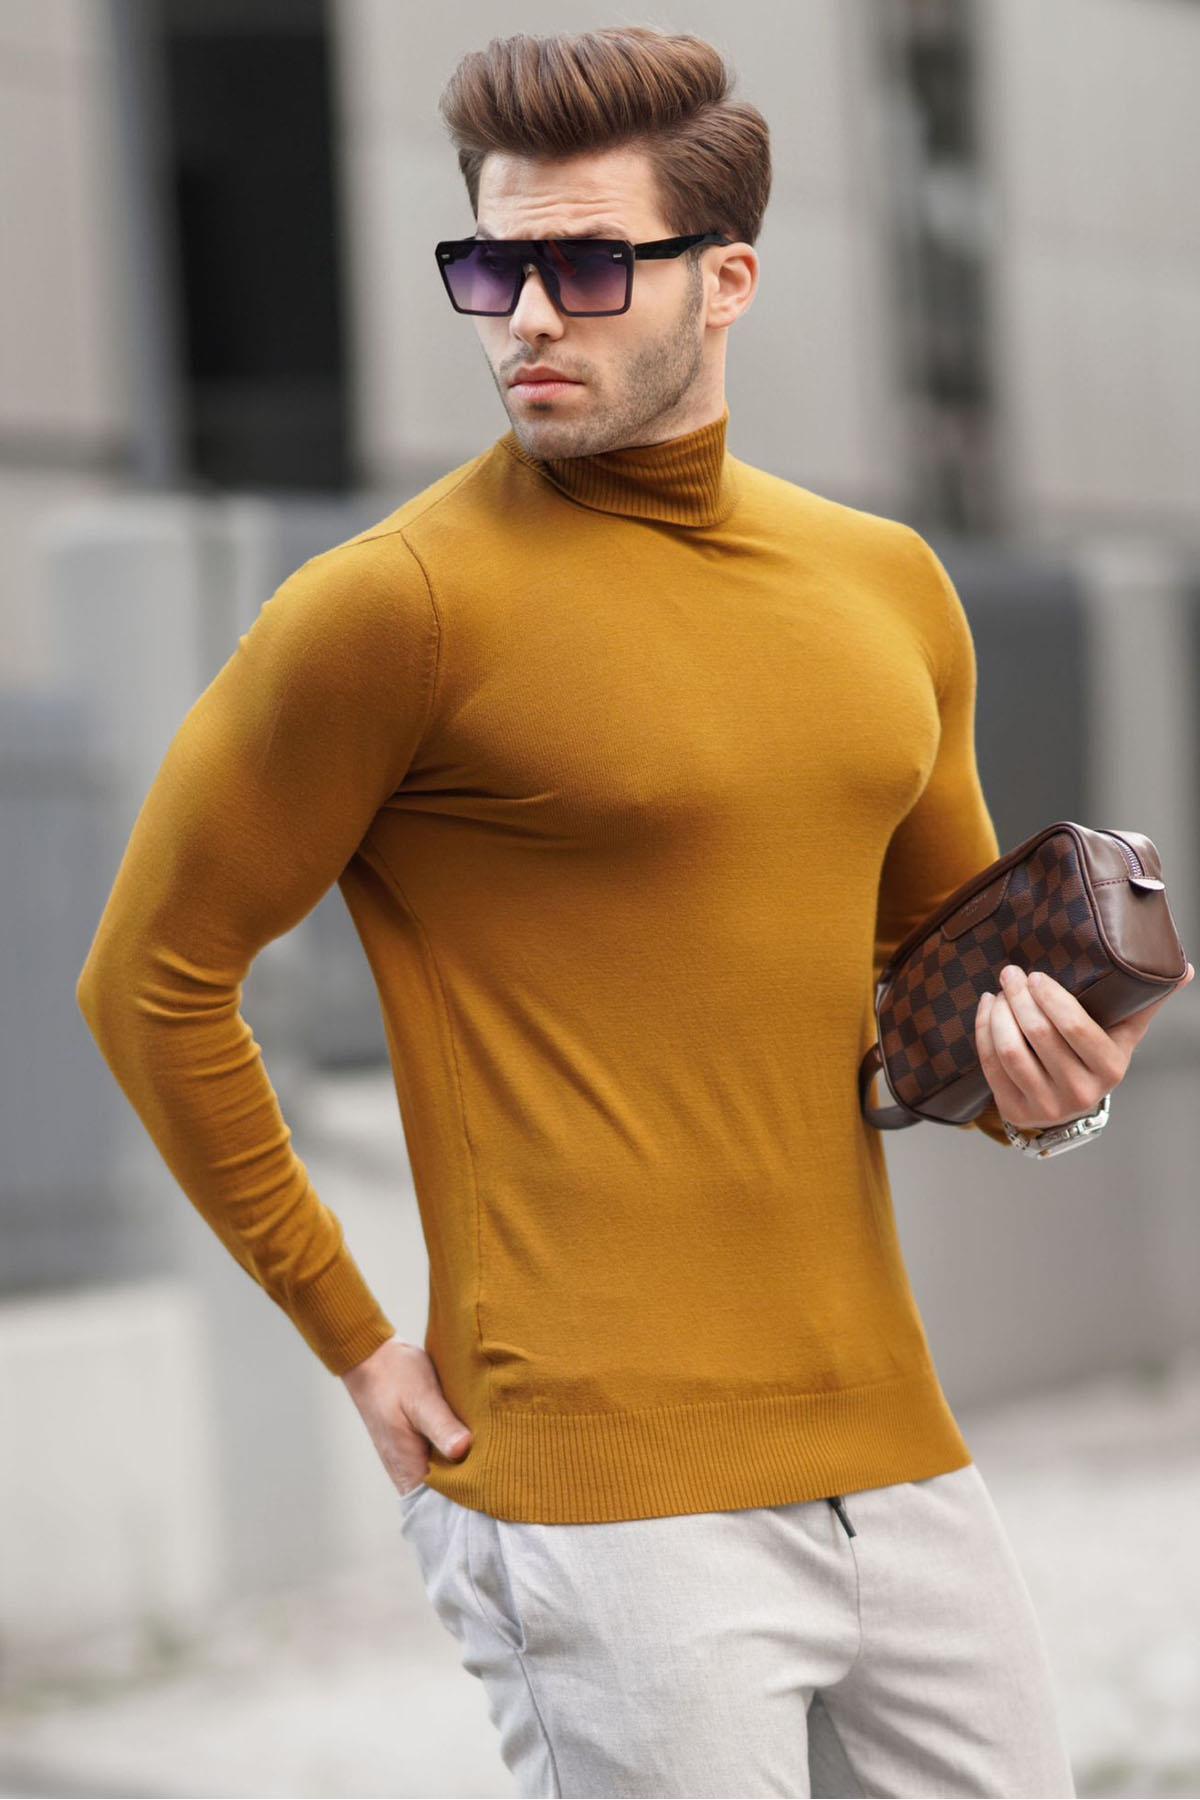 Madmext Men's Tobacco Color Turtleneck Knitwear Sweater 6809